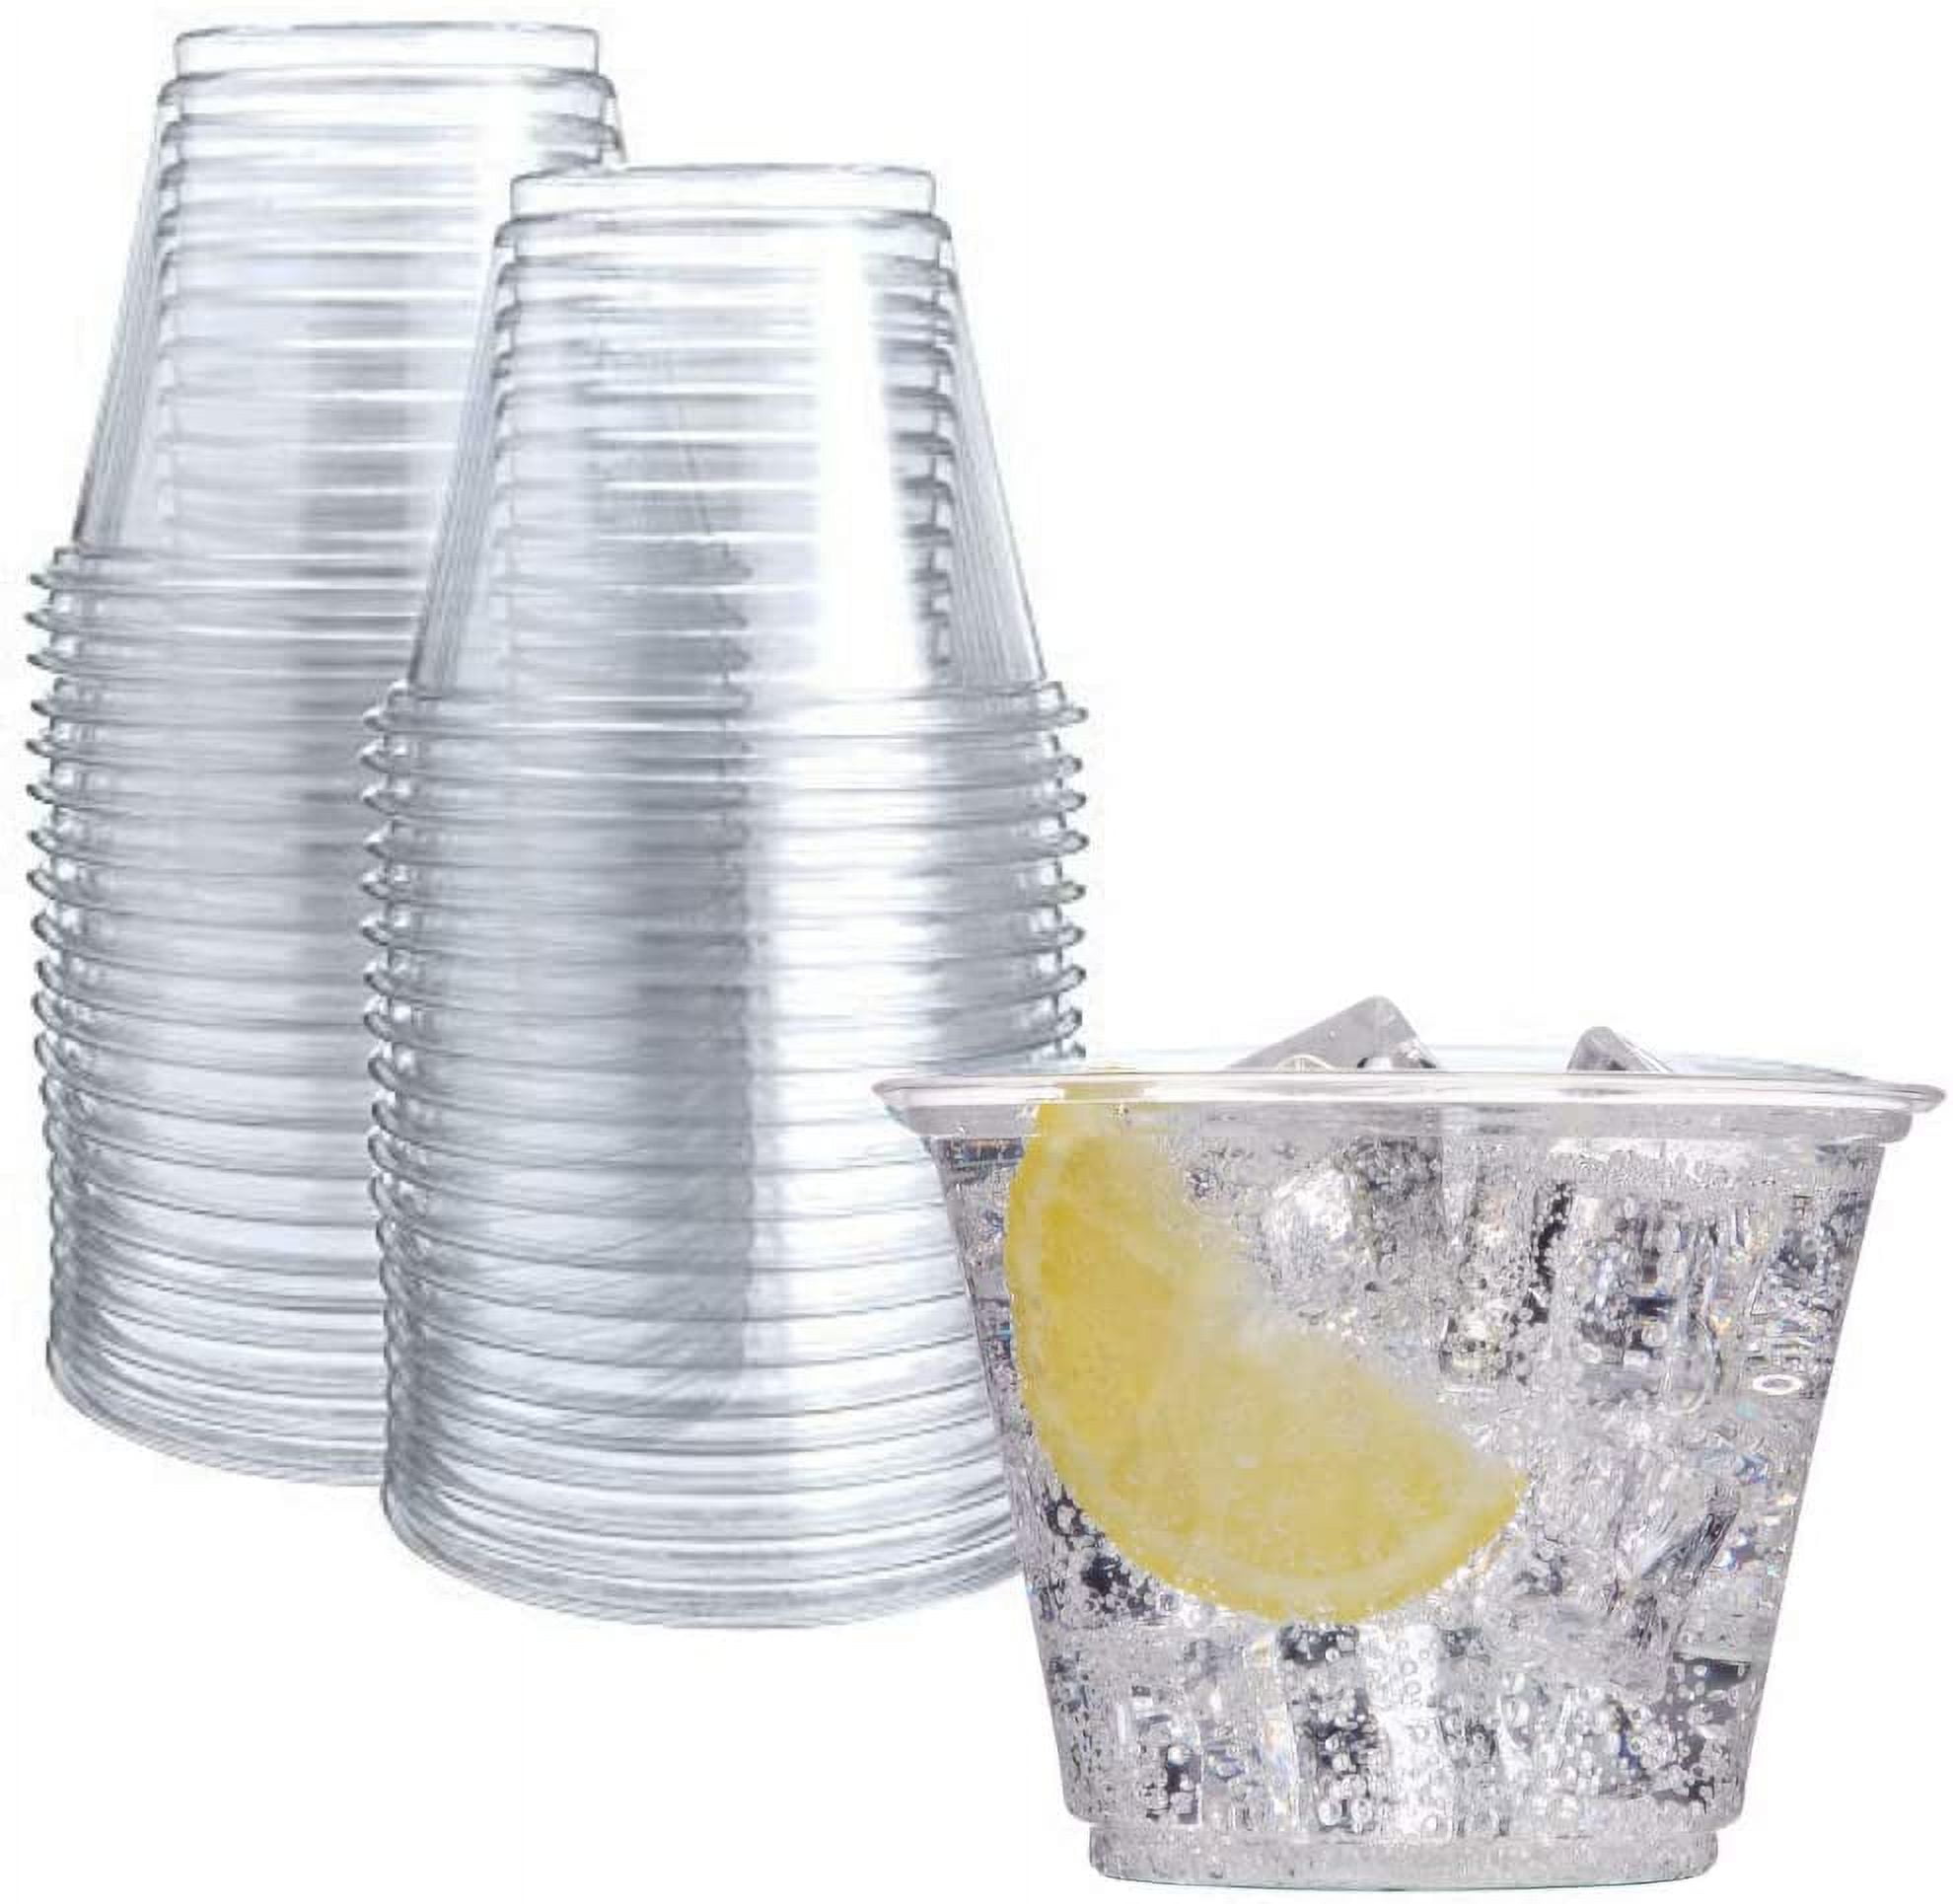 Prestee 500 Clear Plastic Cups, 9oz Plastic Cups - Clear